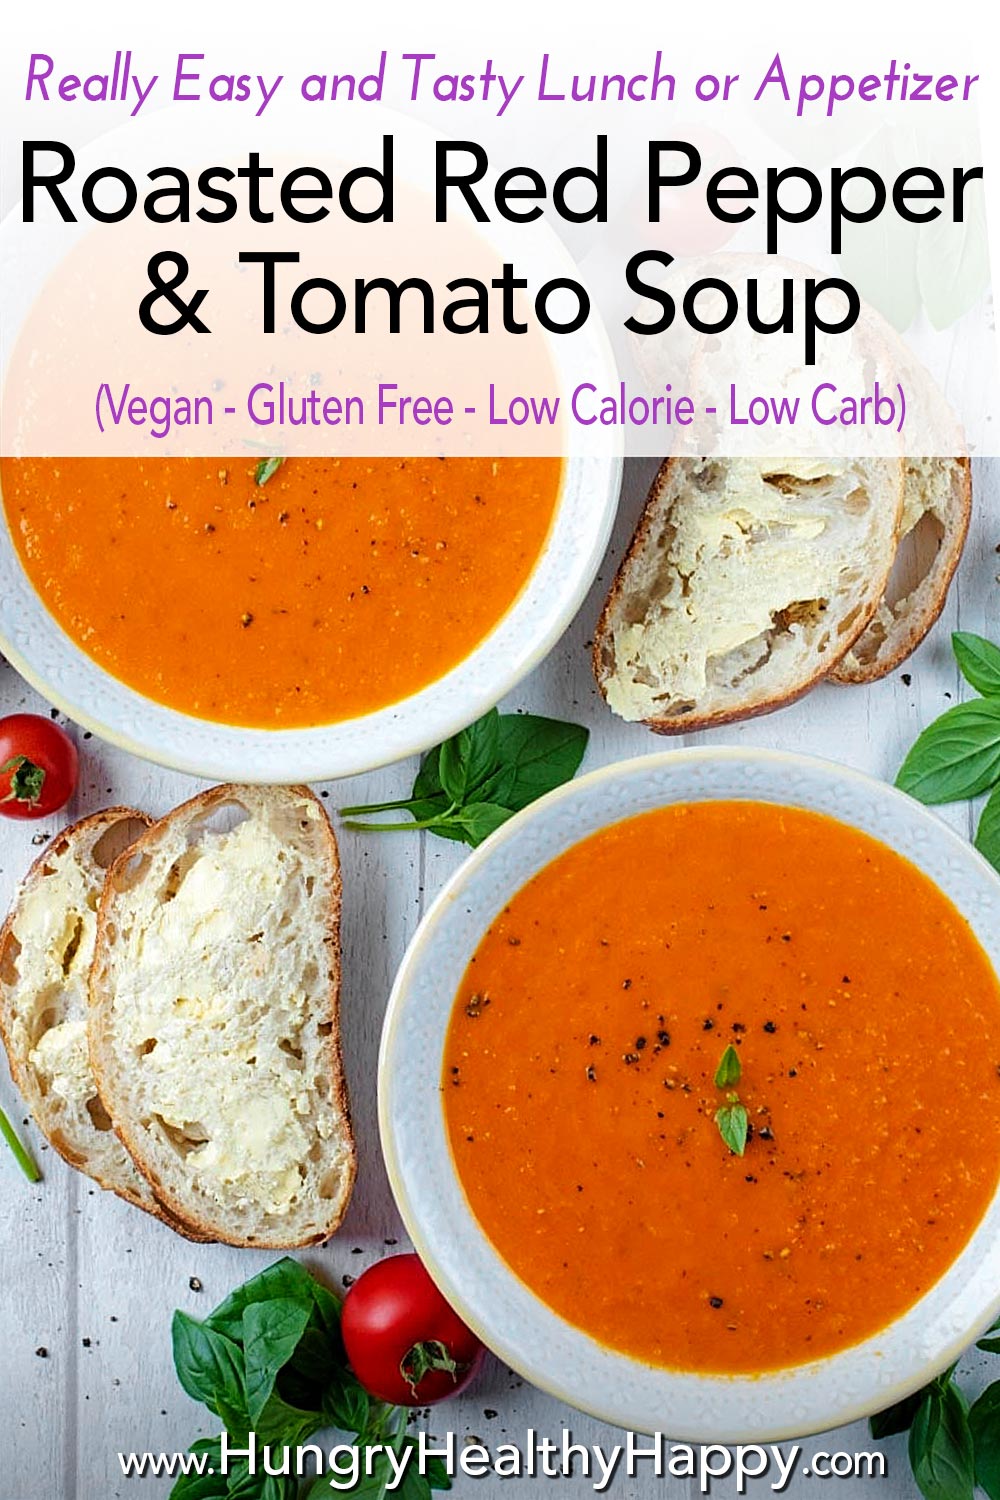 Roasted Red Pepper and Tomato Soup - Hungry Healthy Happy